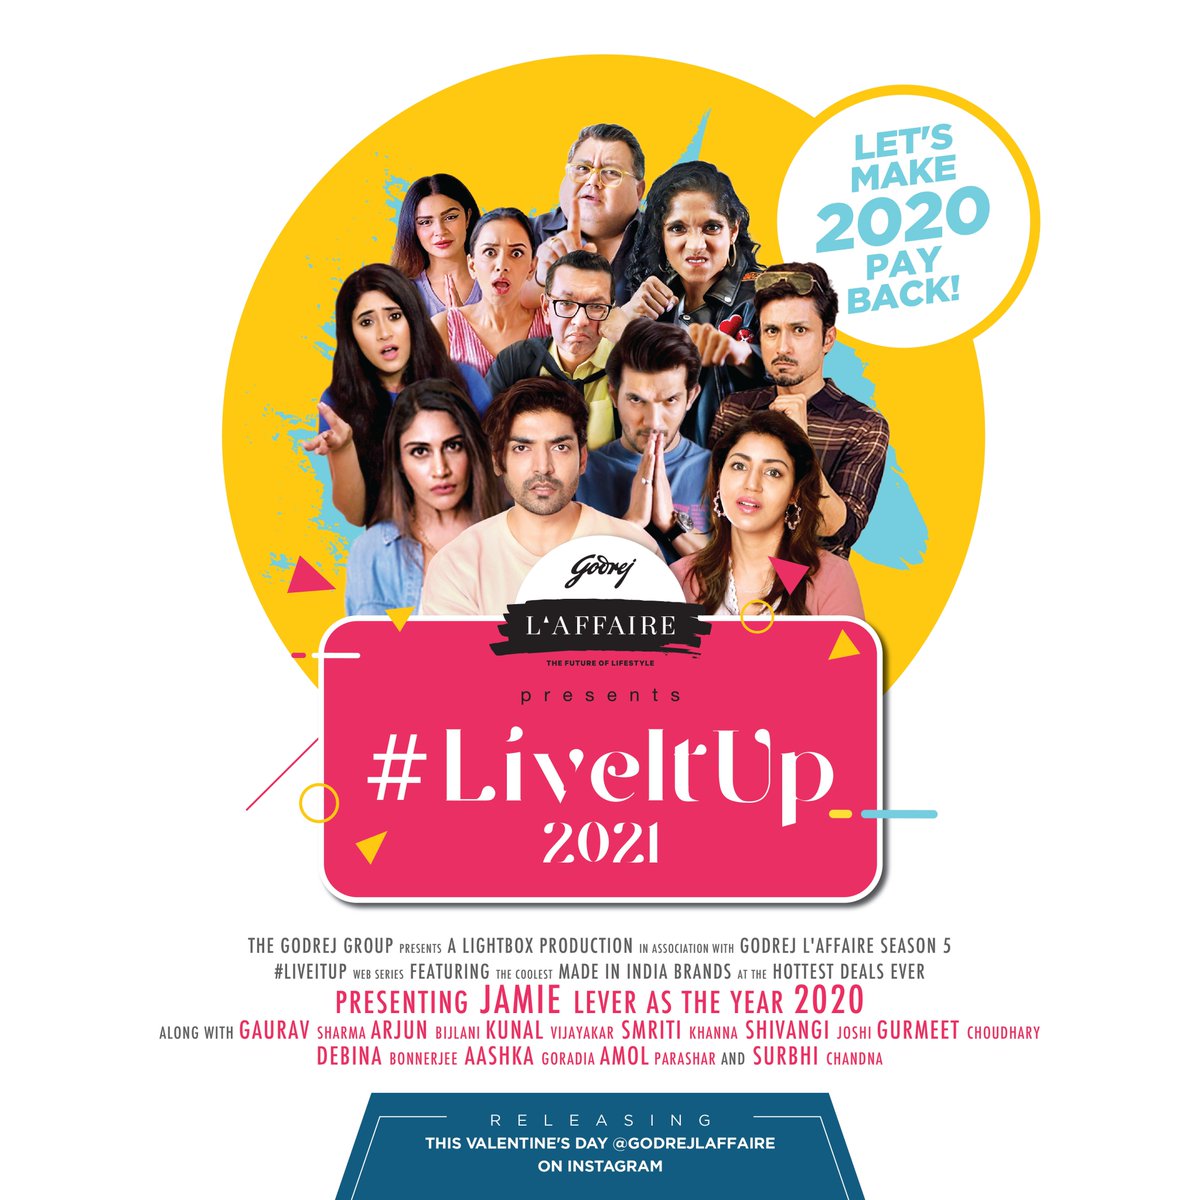 Fun, drama, exciting gifts, and more...join in on the first-of-its-kind digital only Godrej L’Affaire season 5 with @godrejlaffaire . #LiveItUp2021 Visit now bit.ly/Godrejlaffaire…